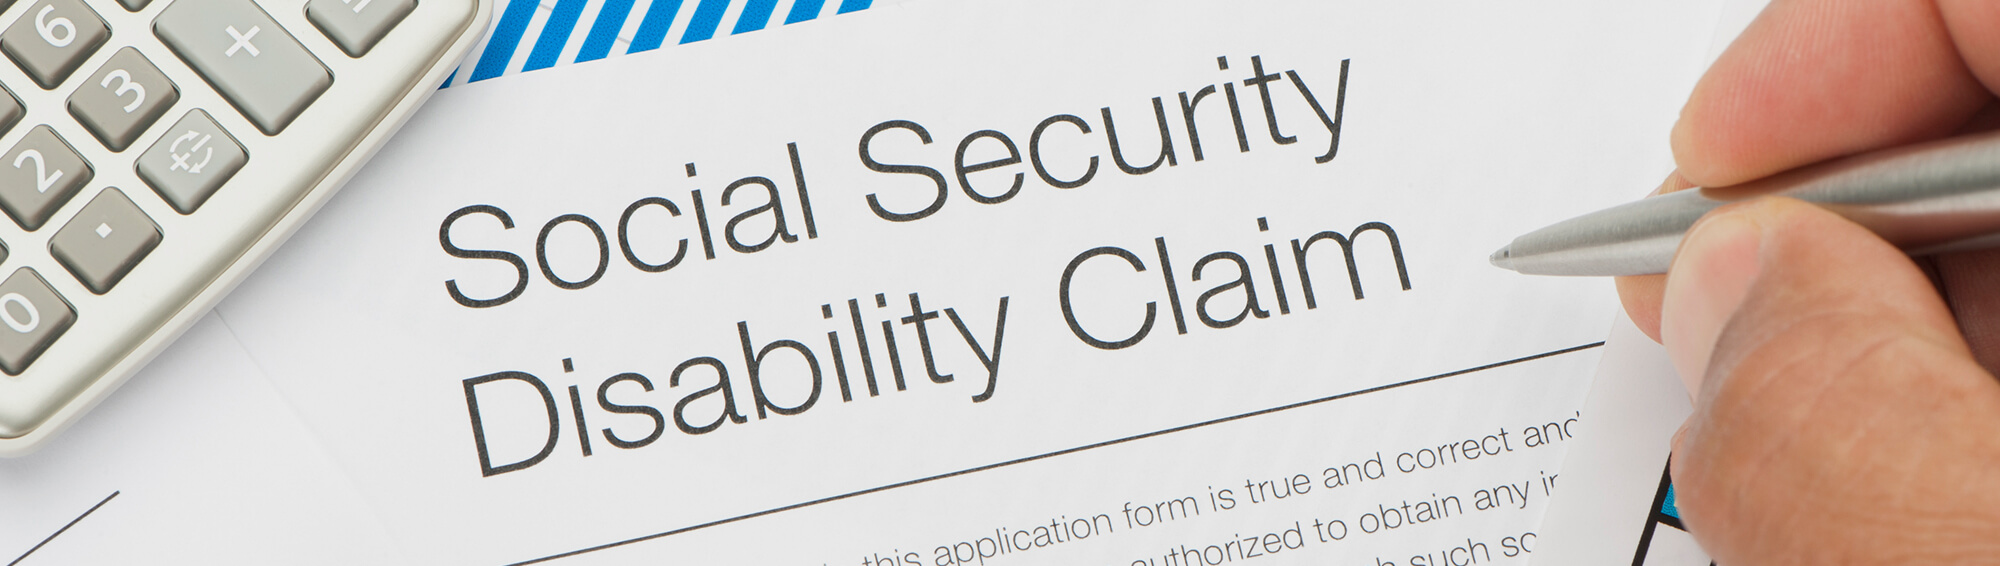 Let Us Handle Your Social Security Disability Claim